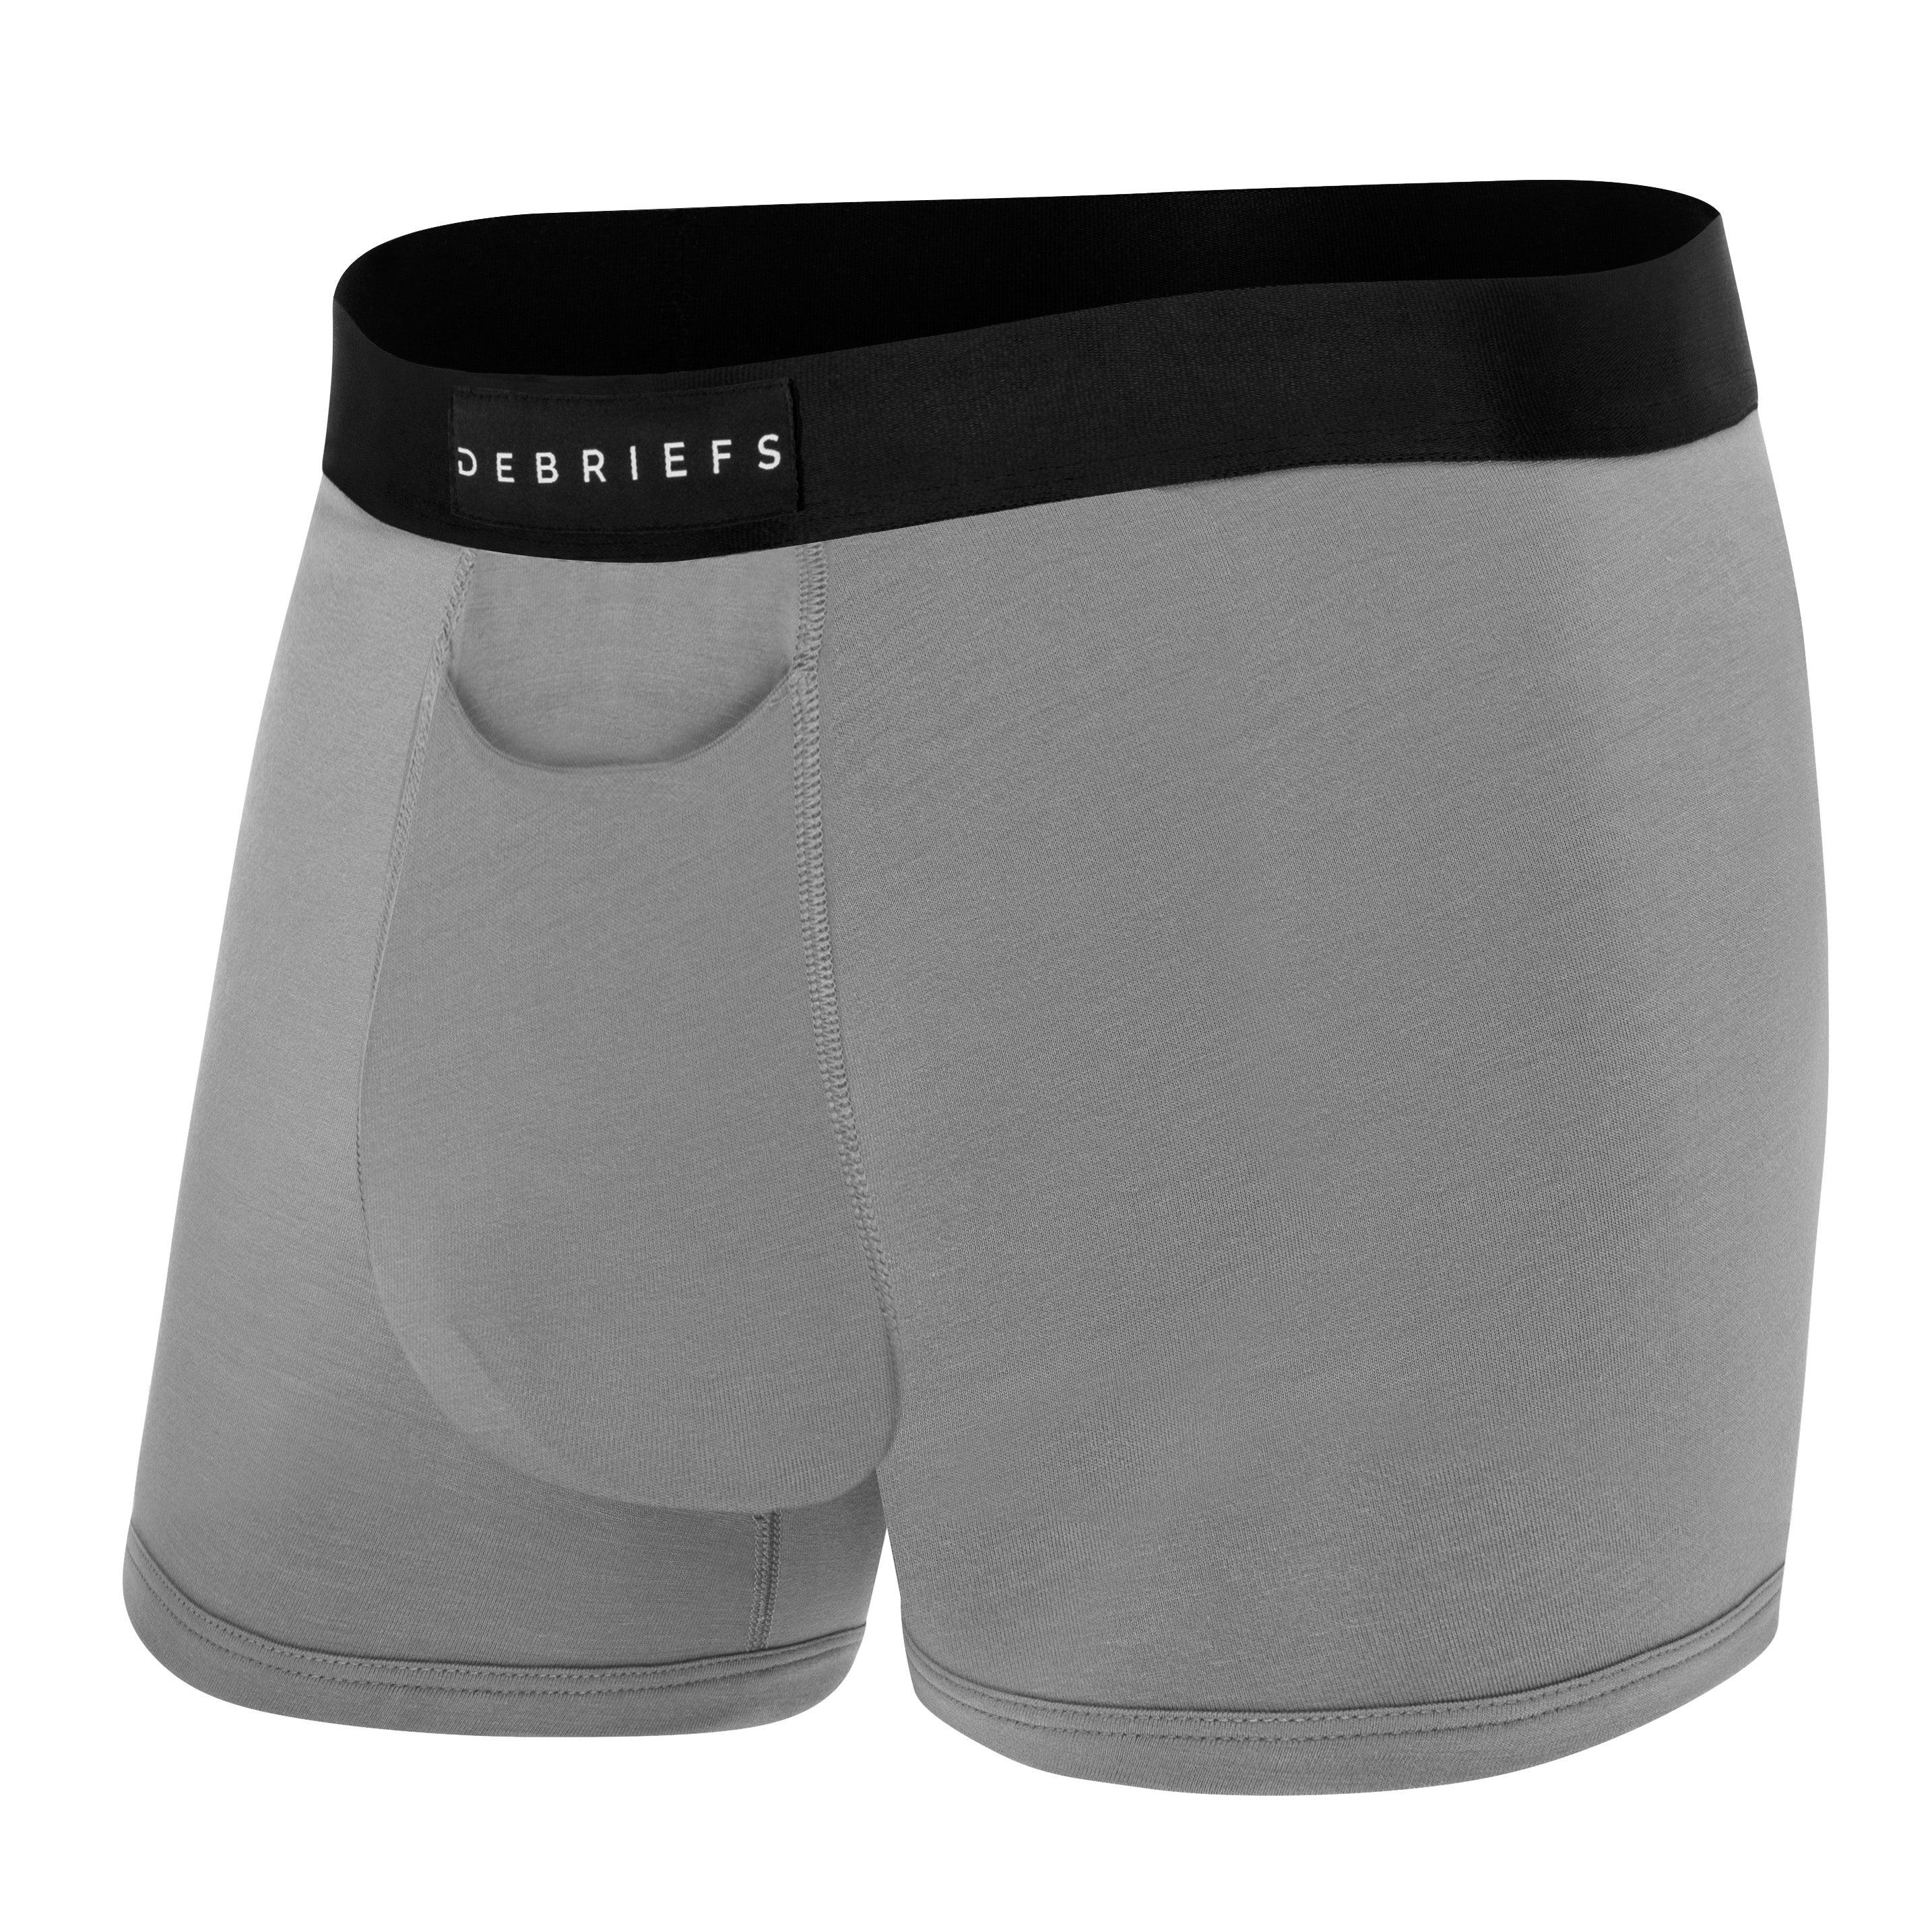 Mens Undies Subscription, 4 pairs every 6 months